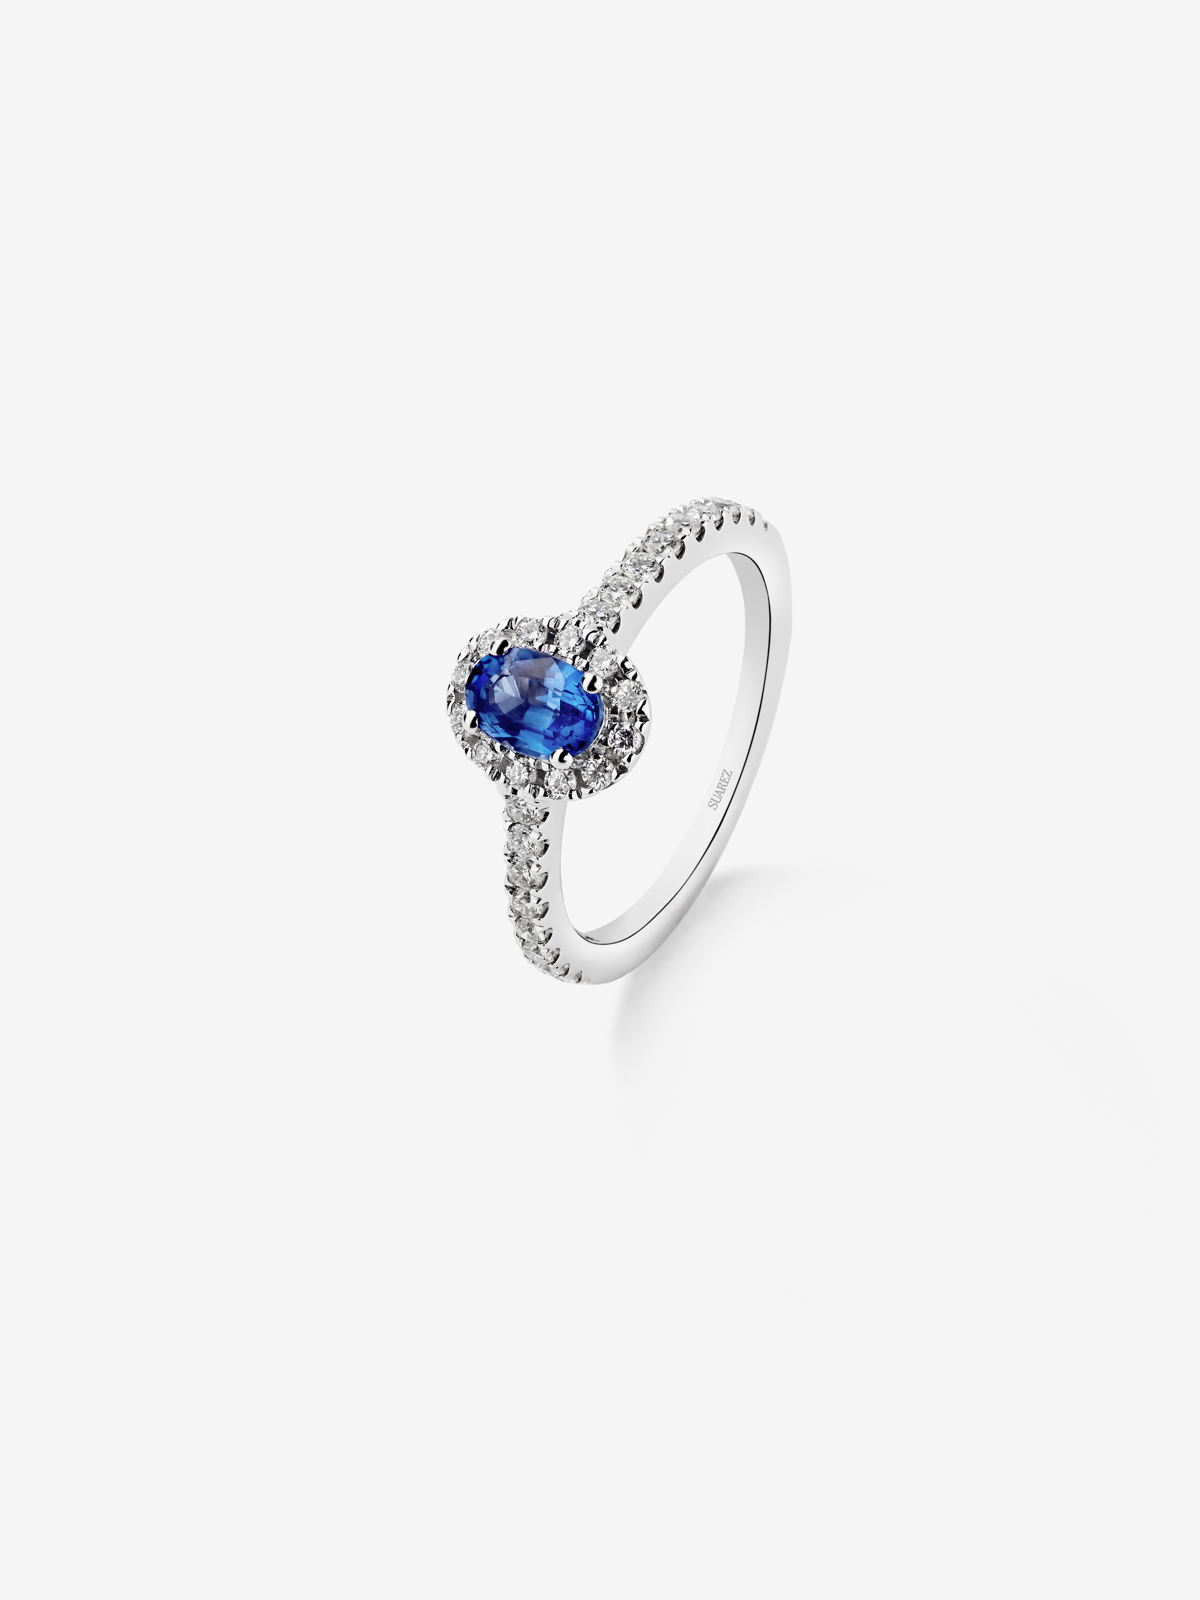 18K White Gold Ring with Blue Zafiro in 0.6 cts and white diamonds in a brilliant 0.39 cts